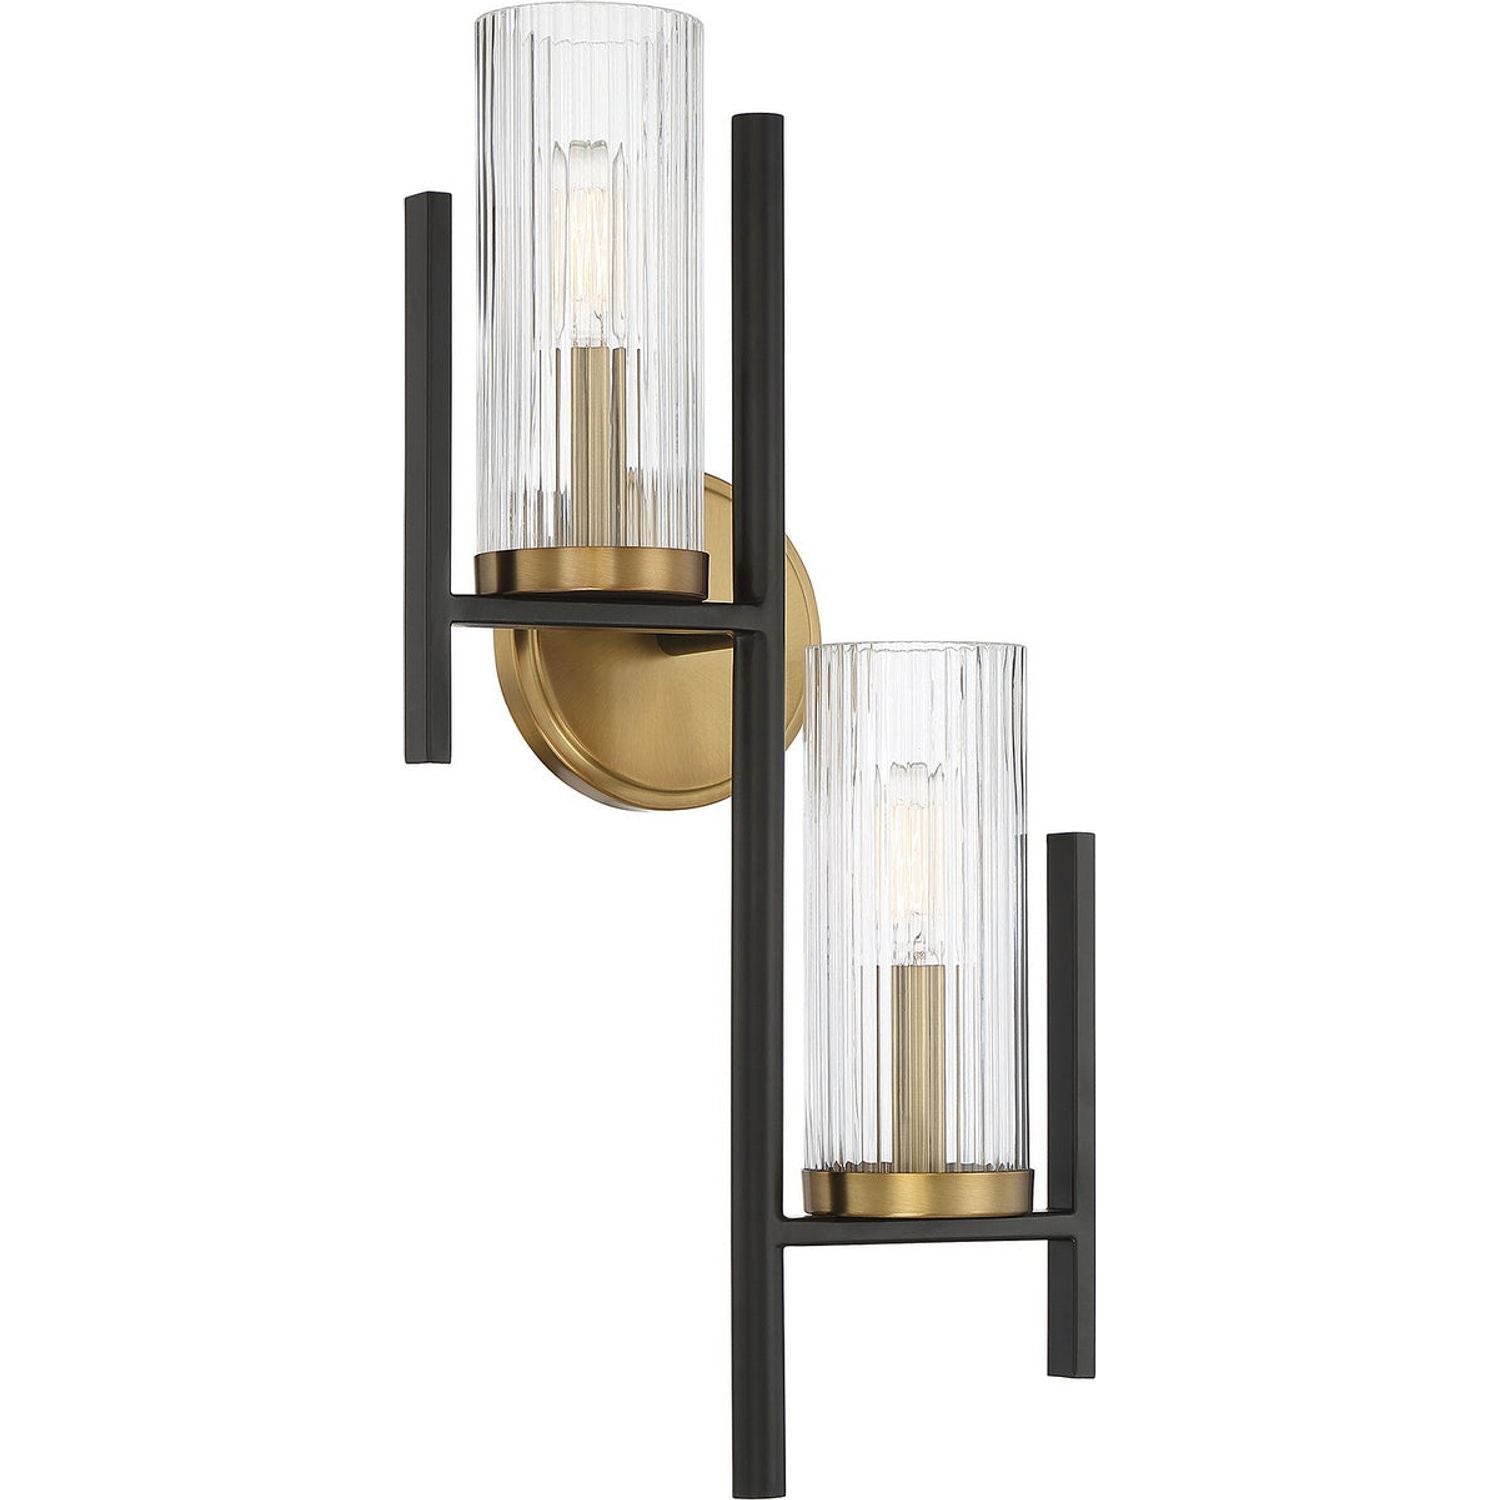 Savoy House - 9-1905-2-143 - Two Light Wall Sconce - Midland - Matte Black with Warm Brass Accents